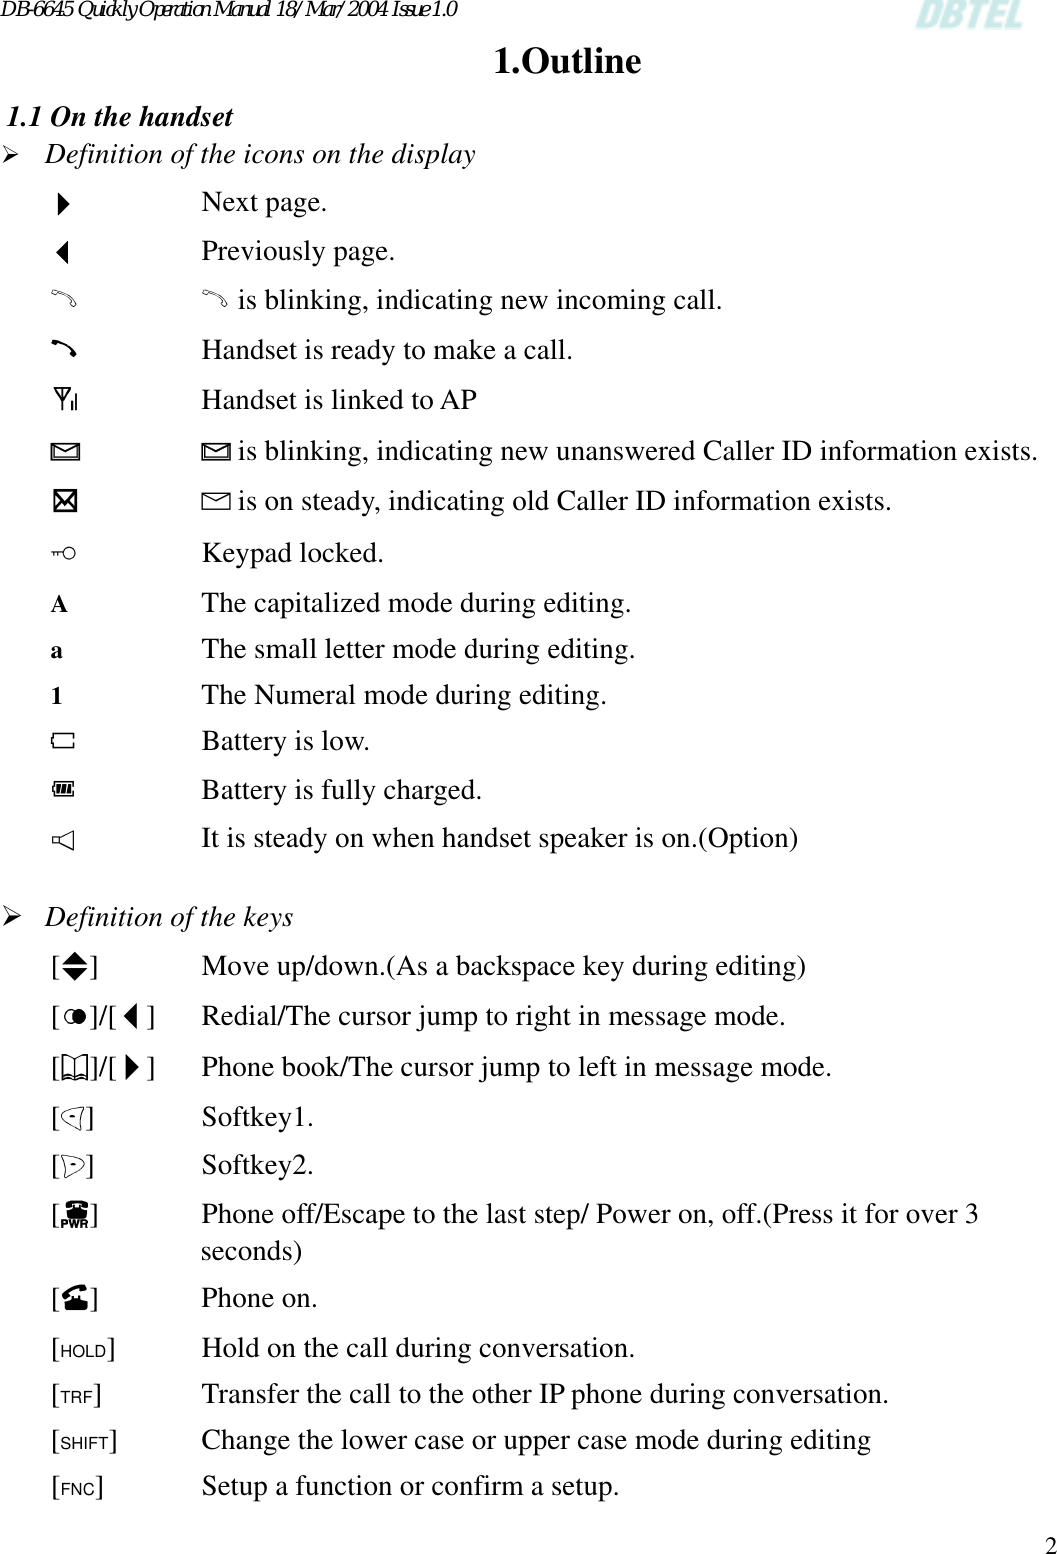 DB-6645 Quickly Operation Manual 18/Mar/2004 Issue 1.0  21.Outline 1.1 On the handset  Definition of the icons on the display    Next page.    Previously page.      is blinking, indicating new incoming call.       Handset is ready to make a call.       Handset is linked to AP      is blinking, indicating new unanswered Caller ID information exists.      is on steady, indicating old Caller ID information exists.    Keypad locked. A   The capitalized mode during editing. a      The small letter mode during editing. 1   The Numeral mode during editing.    Battery is low.       Battery is fully charged.       It is steady on when handset speaker is on.(Option)   Definition of the keys []      Move up/down.(As a backspace key during editing) []/[]  Redial/The cursor jump to right in message mode. []/[]  Phone book/The cursor jump to left in message mode. []   Softkey1. []   Softkey2. []     Phone off/Escape to the last step/ Power on, off.(Press it for over 3 seconds) []   Phone on. [HOLD]      Hold on the call during conversation. [TRF]      Transfer the call to the other IP phone during conversation. [SHIFT]      Change the lower case or upper case mode during editing   [FNC]      Setup a function or confirm a setup. 